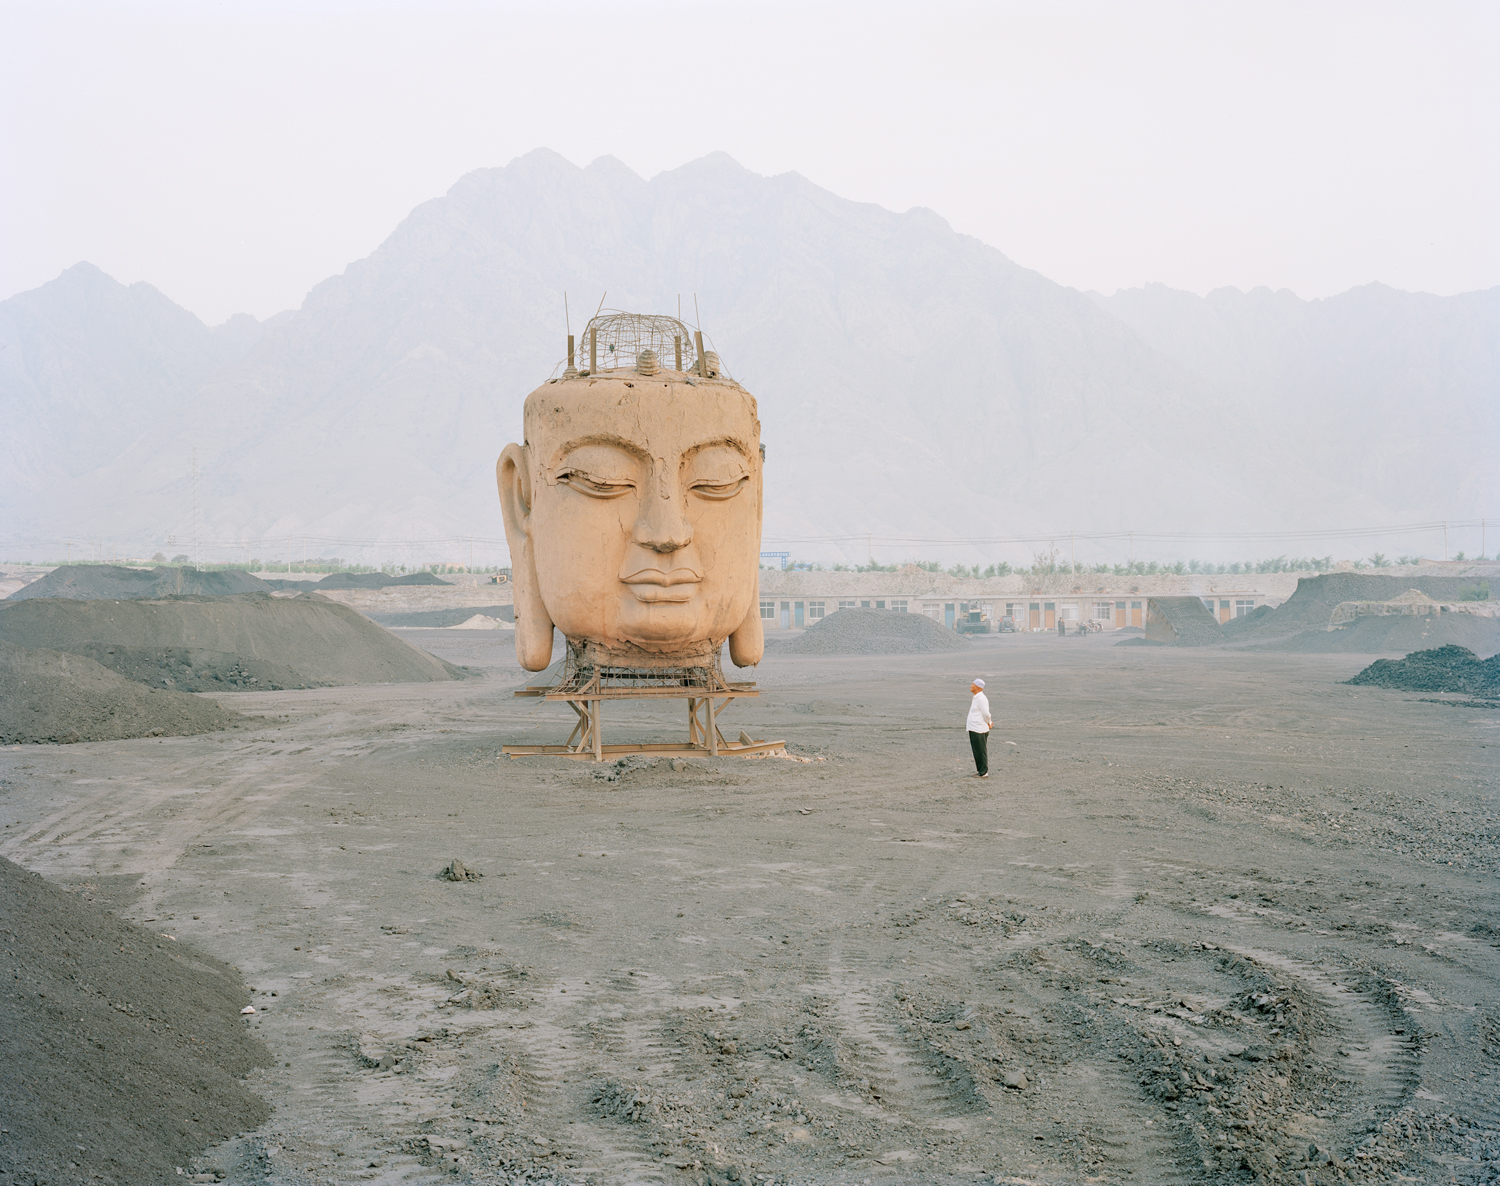 image: A giant Buddha's face in a coal yard, Ningxia province.